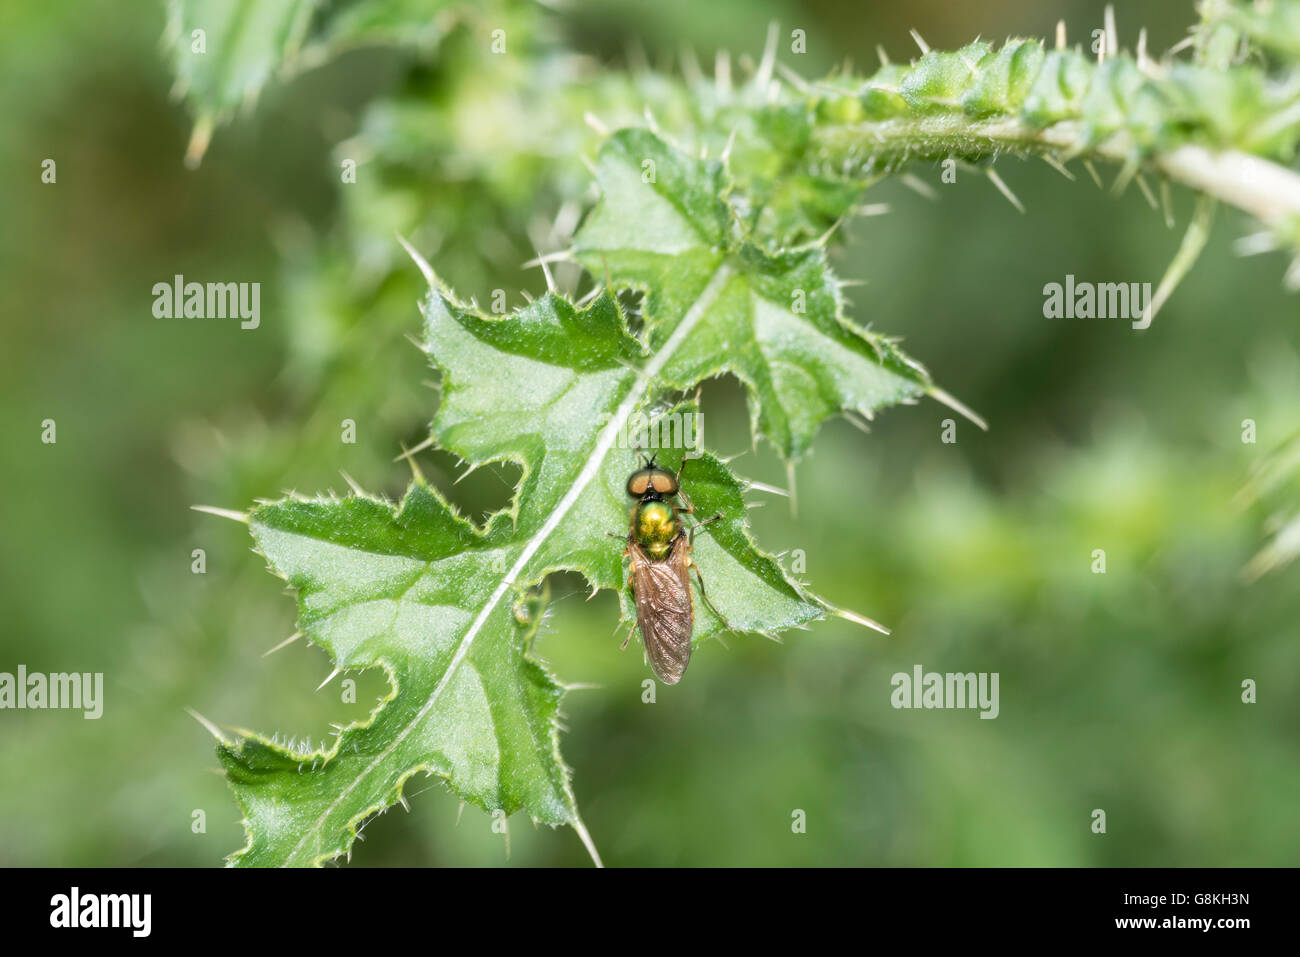 A Broad Centurion Soldier Fly perched on a thistle leaf Stock Photo